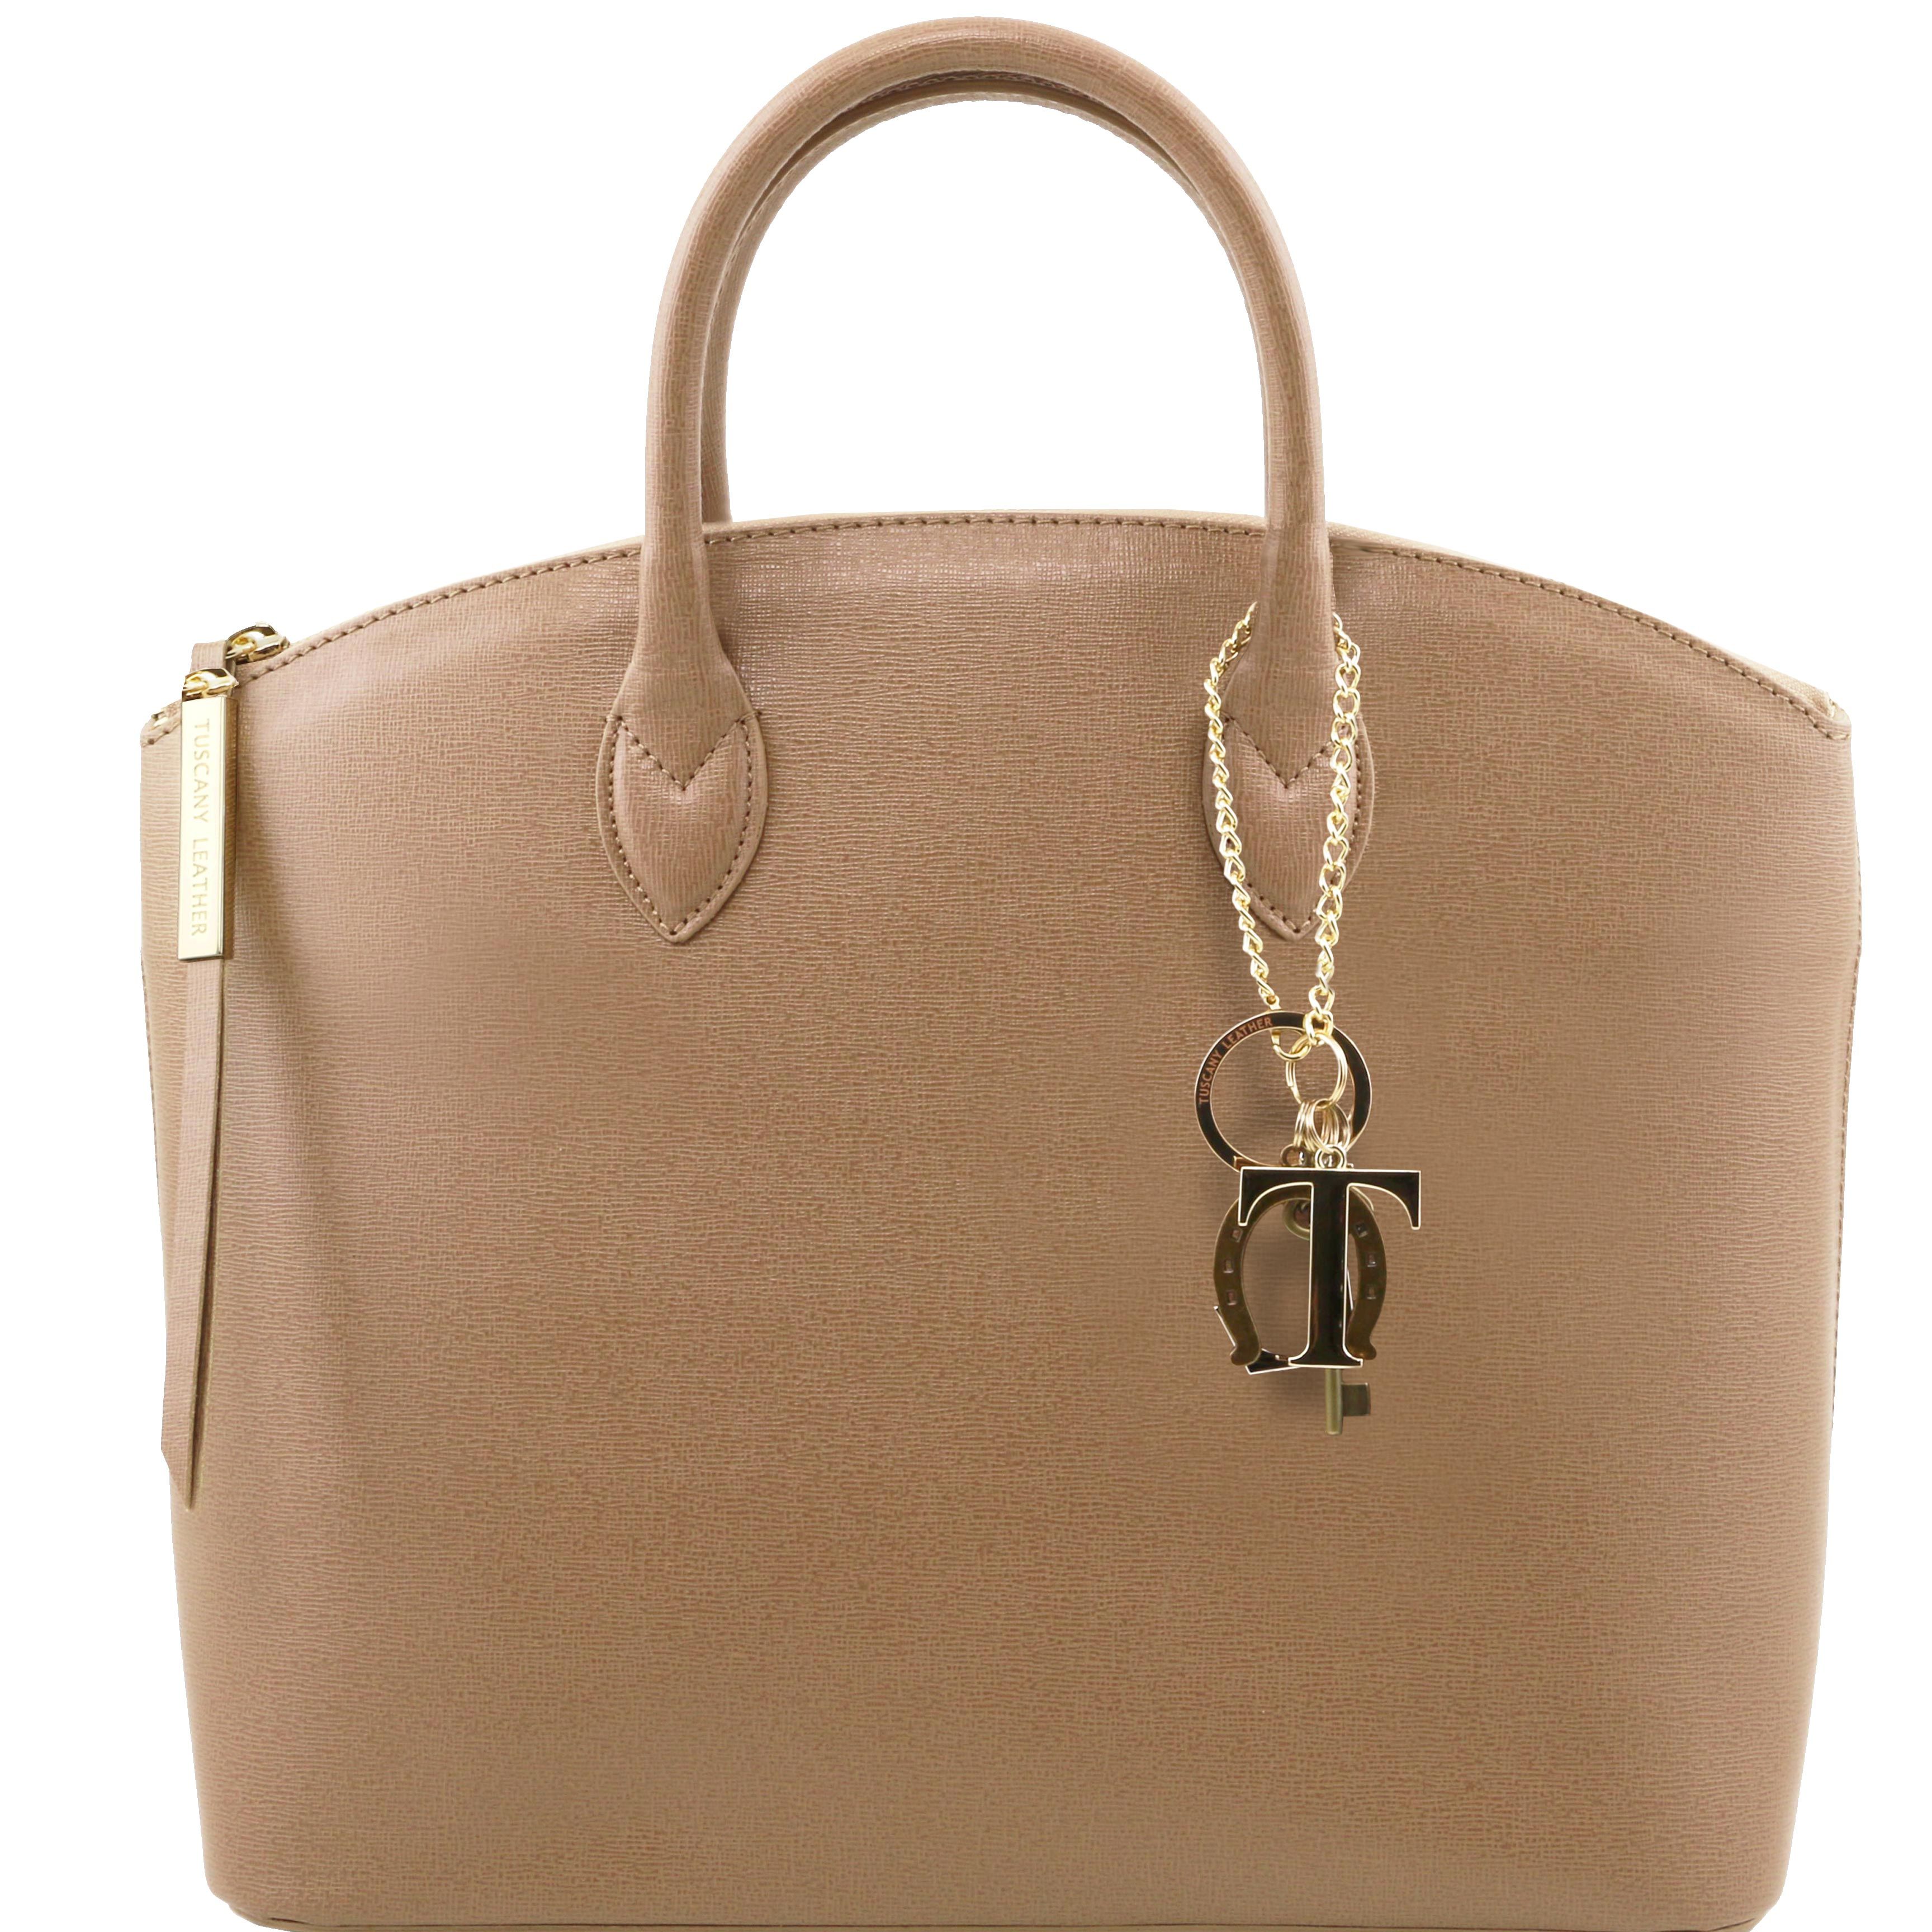 TL KeyLuck Saffiano leather tote Light Taupe